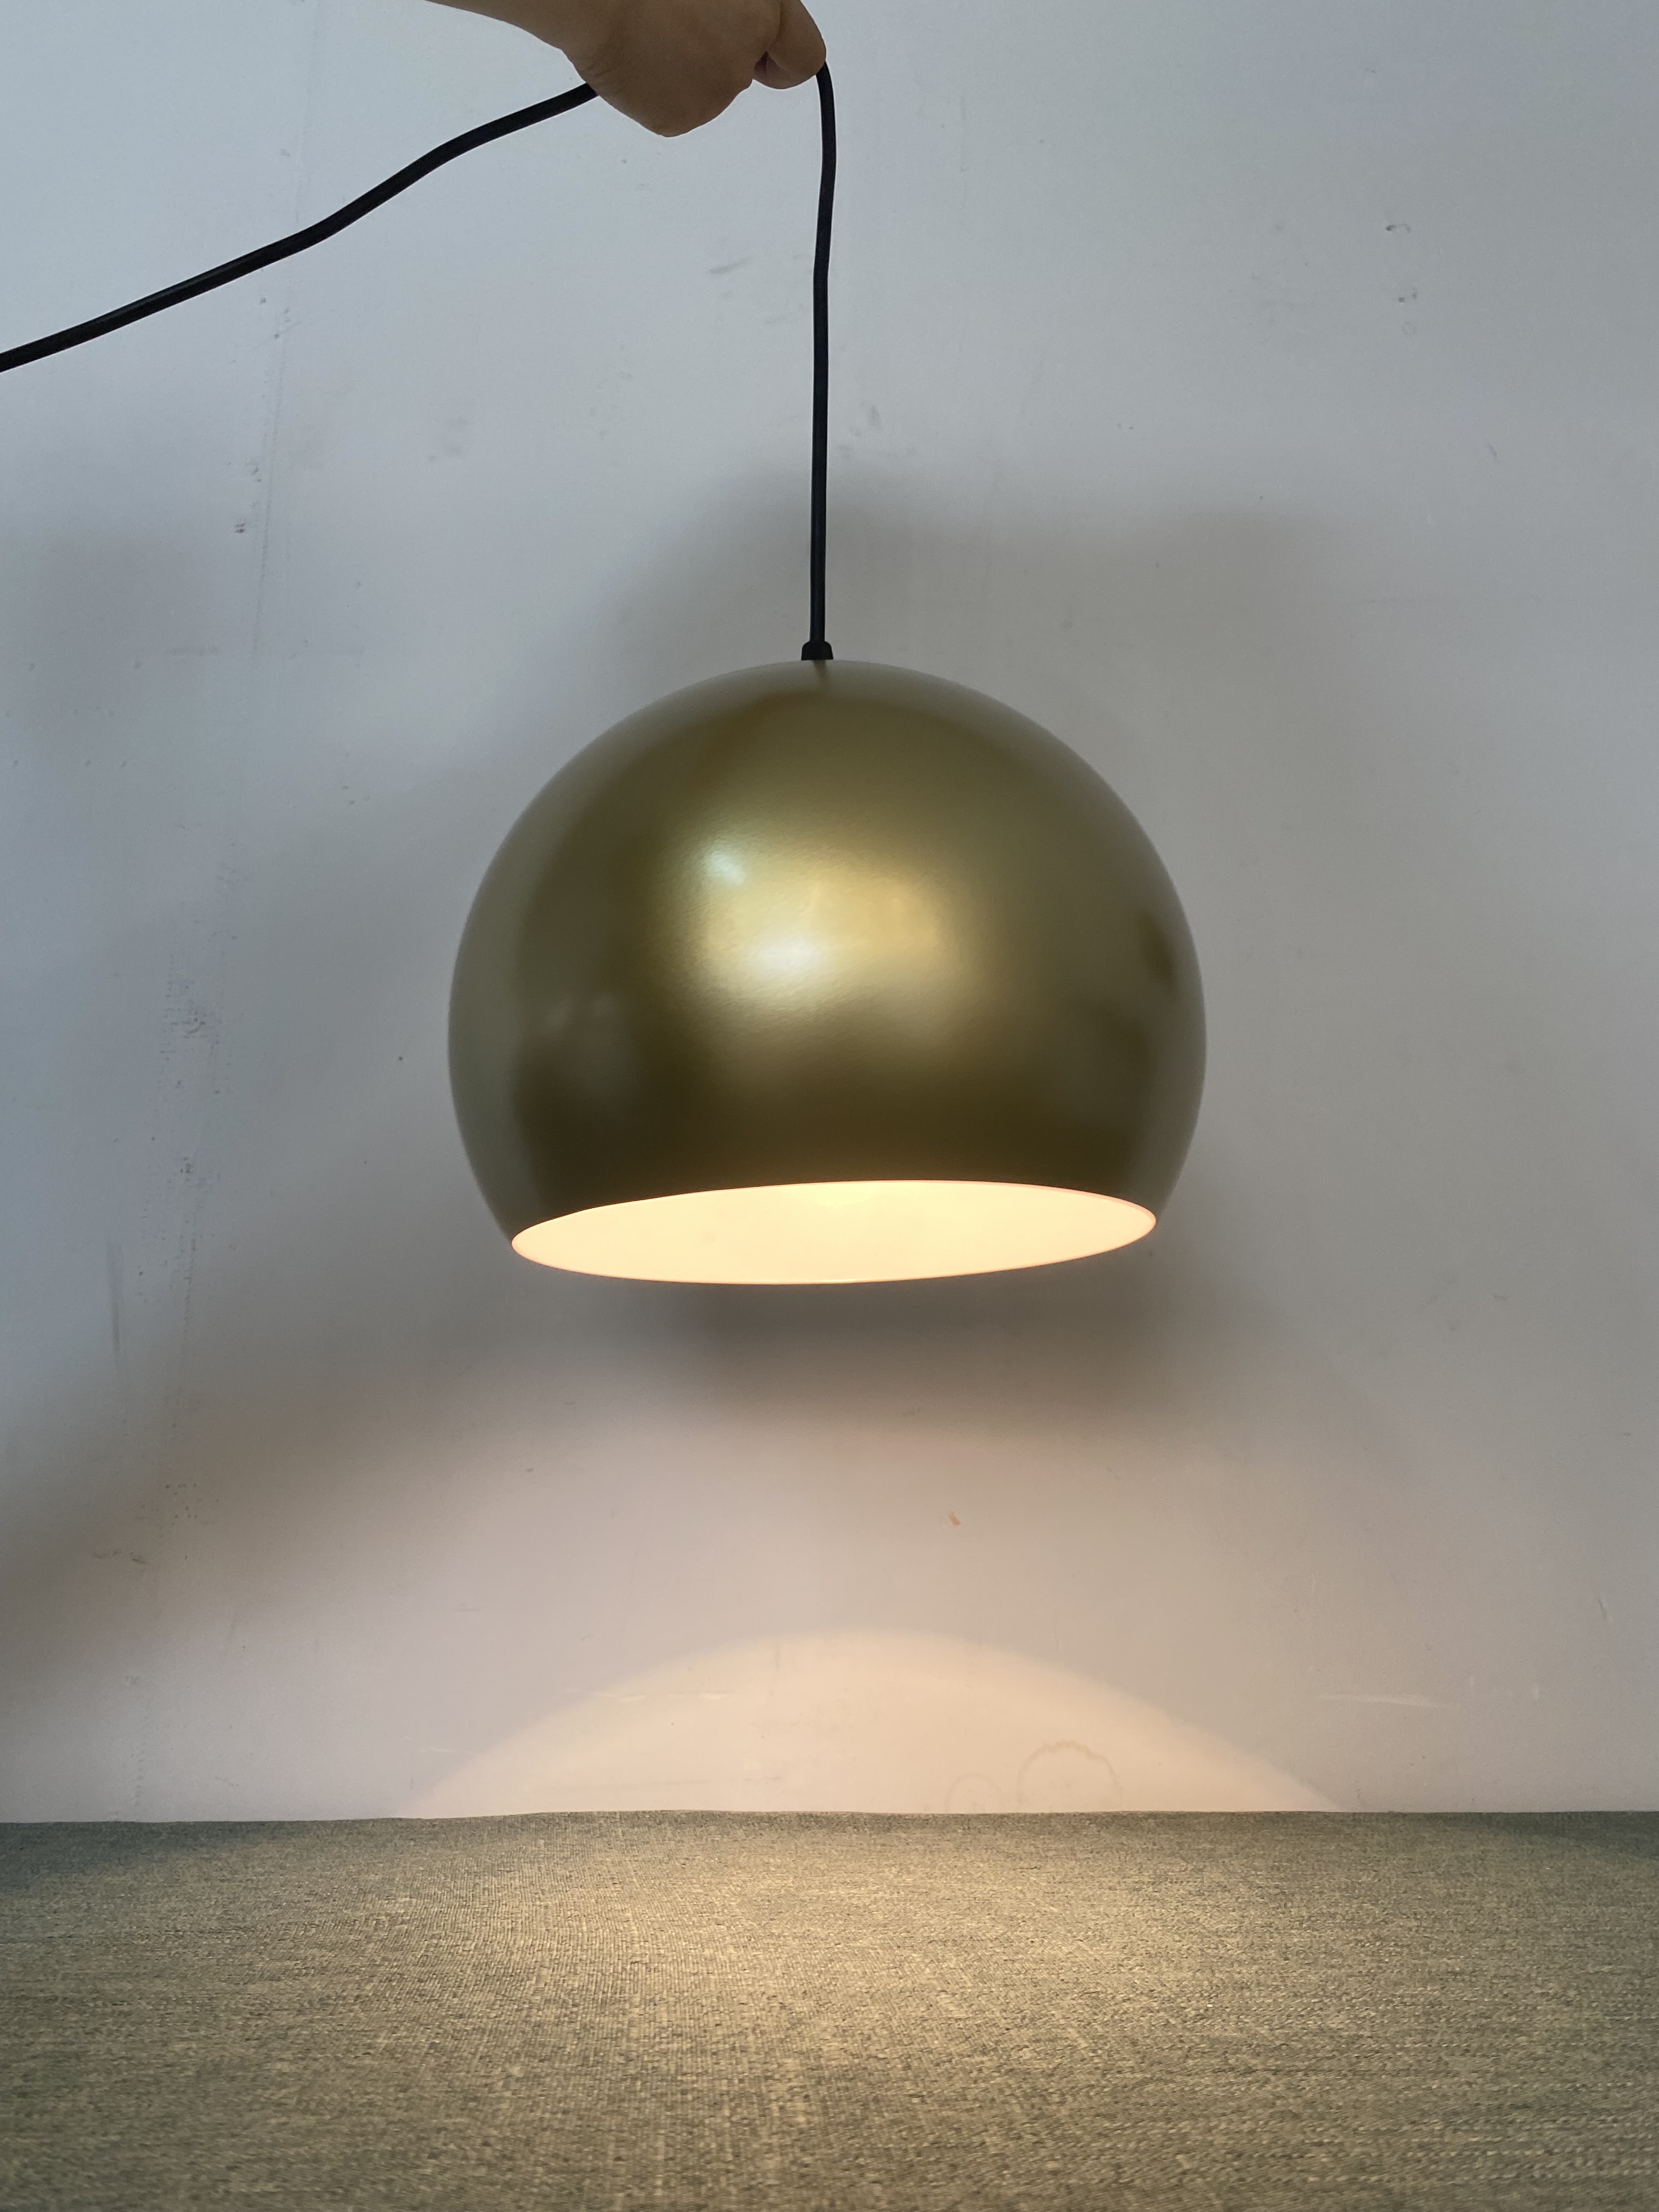 Simple Round Gold Shade Small Size Pendant Lighting in Home (KYA-12P)